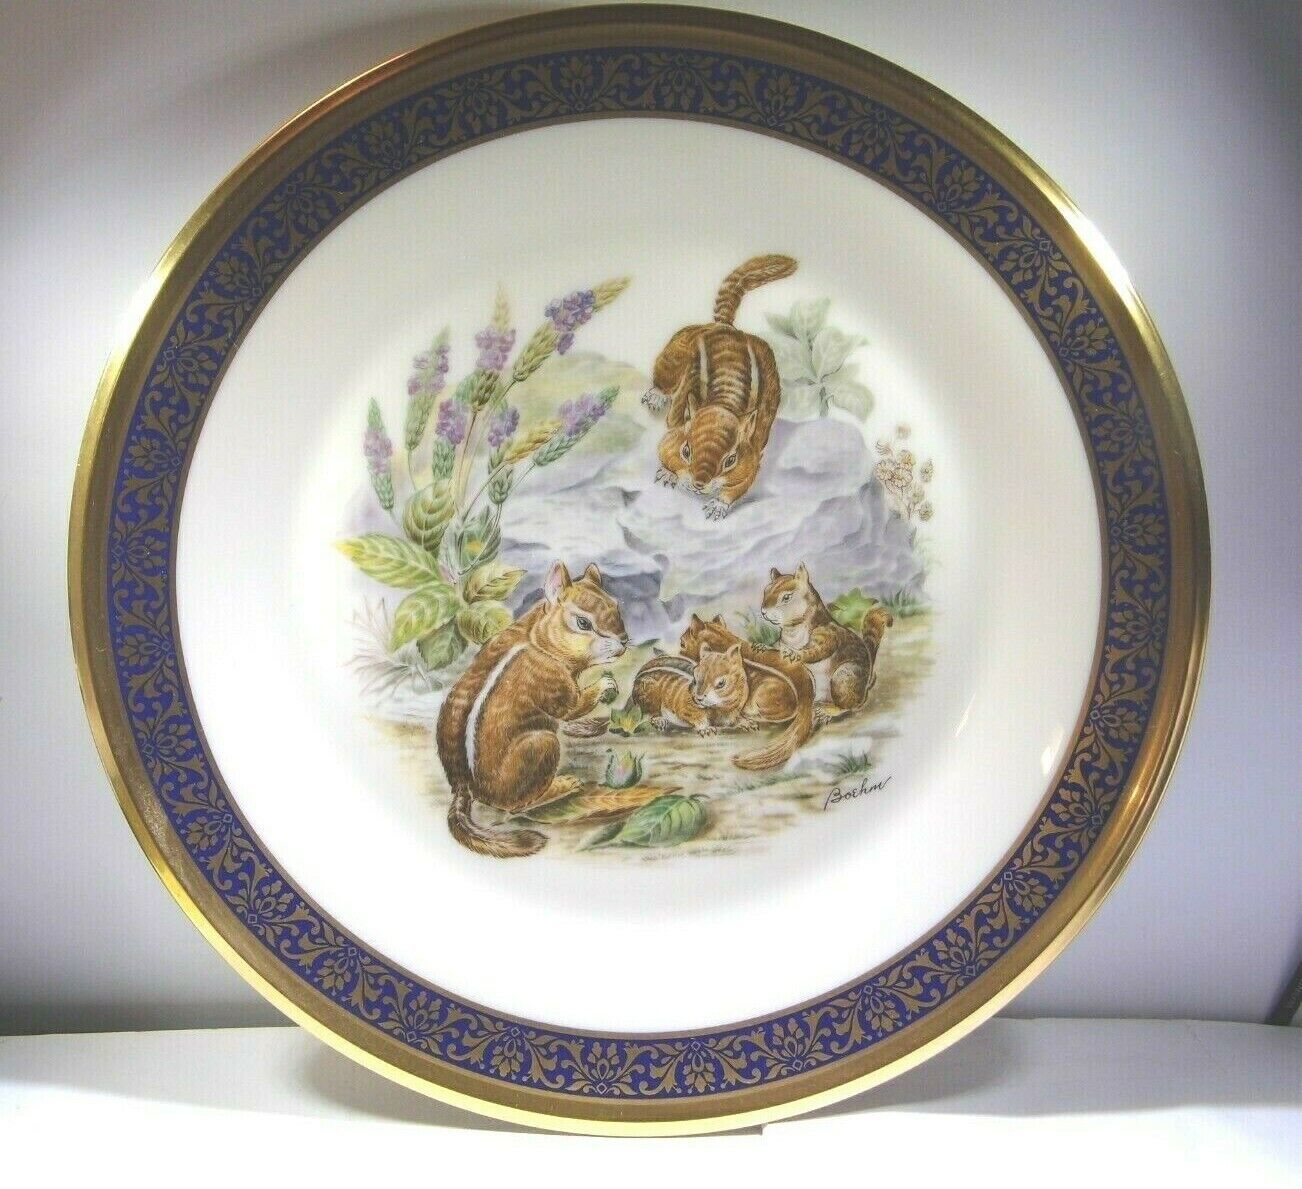 Eastern Chipmunks Woodland Wildlife by Lenox Boehm 1976 Collectible Plate Boxed - $75.99